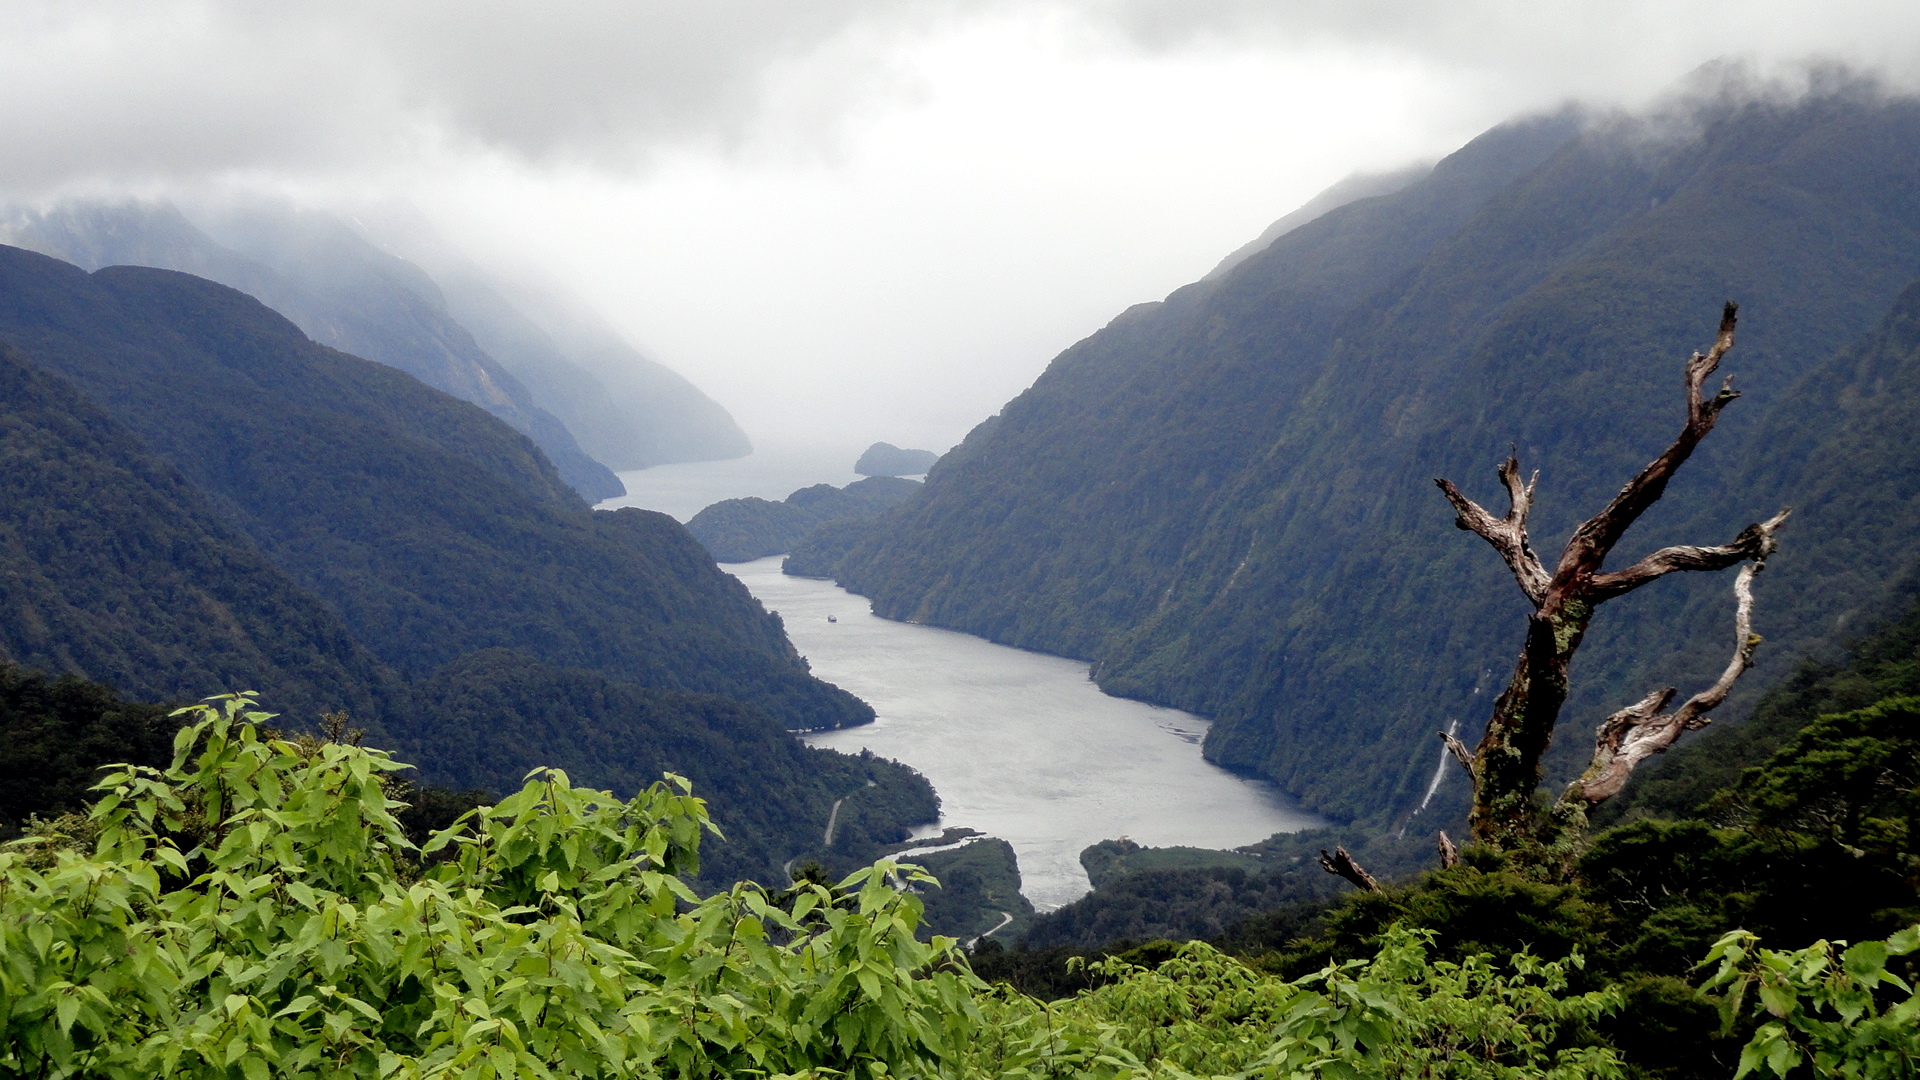 Top of Doubtful Sound